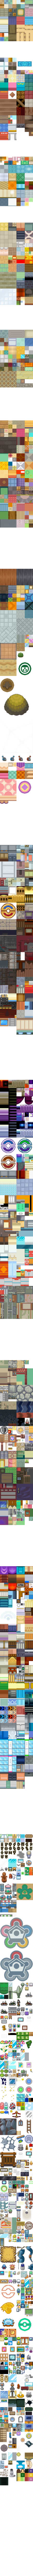 Ripped Tileset Interior HGSS